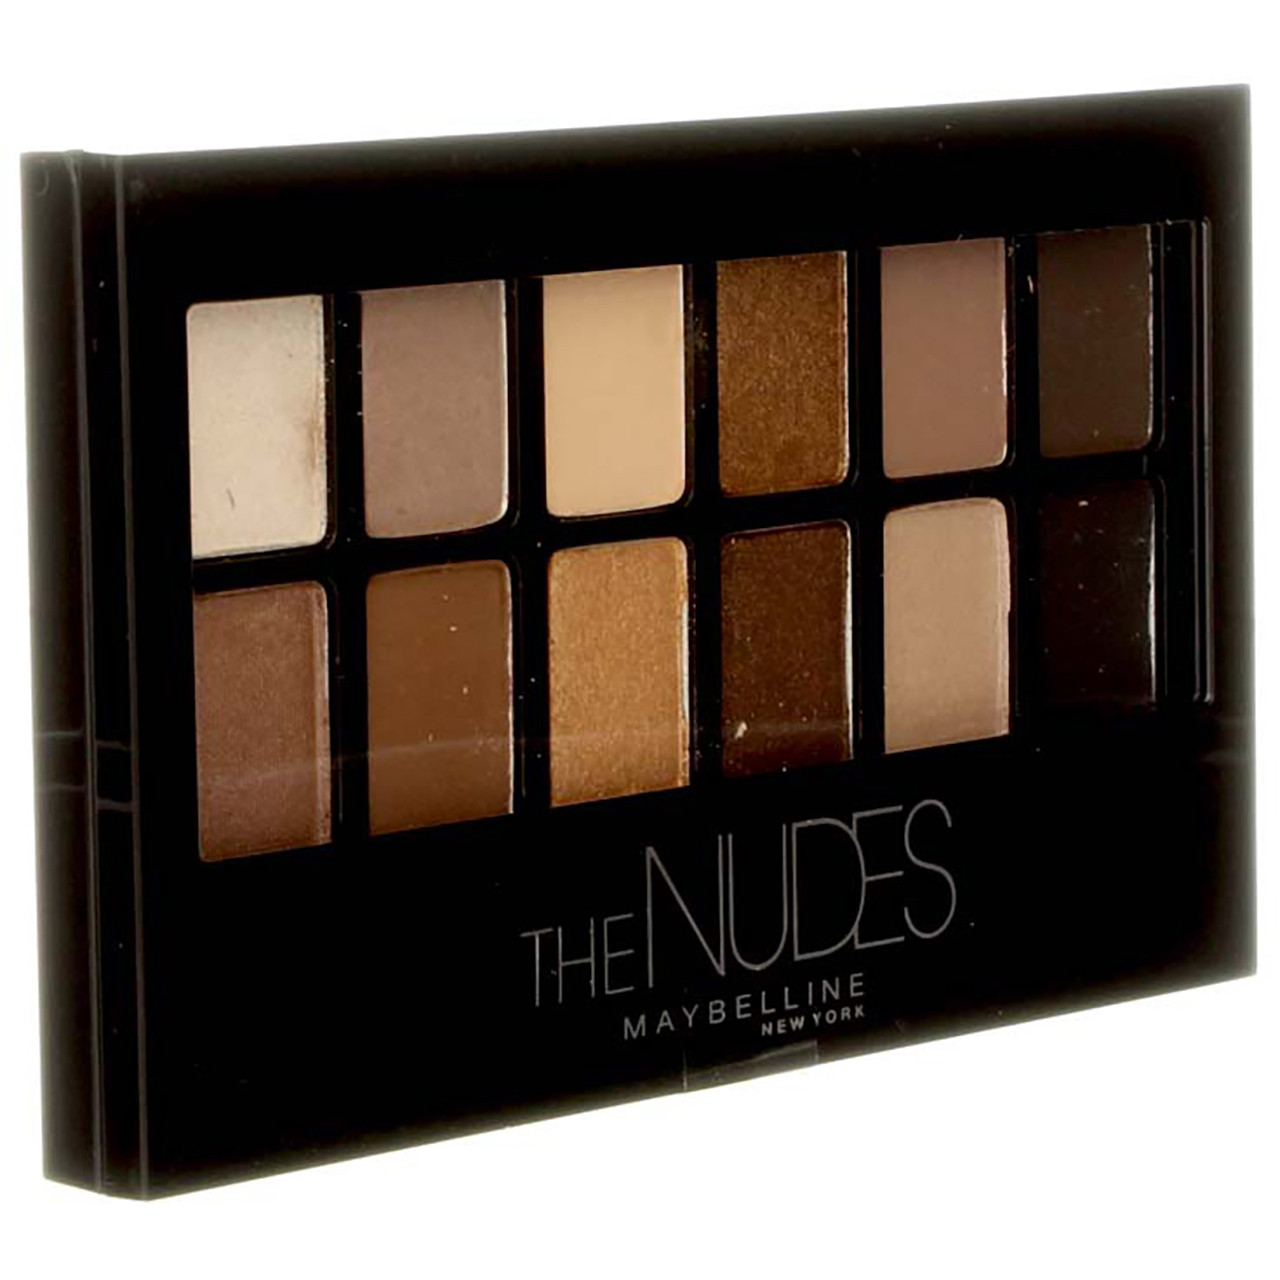 Maybelline Eyeshadow Palette, The Nudes, 12 Shade Palette - image 3 of 7